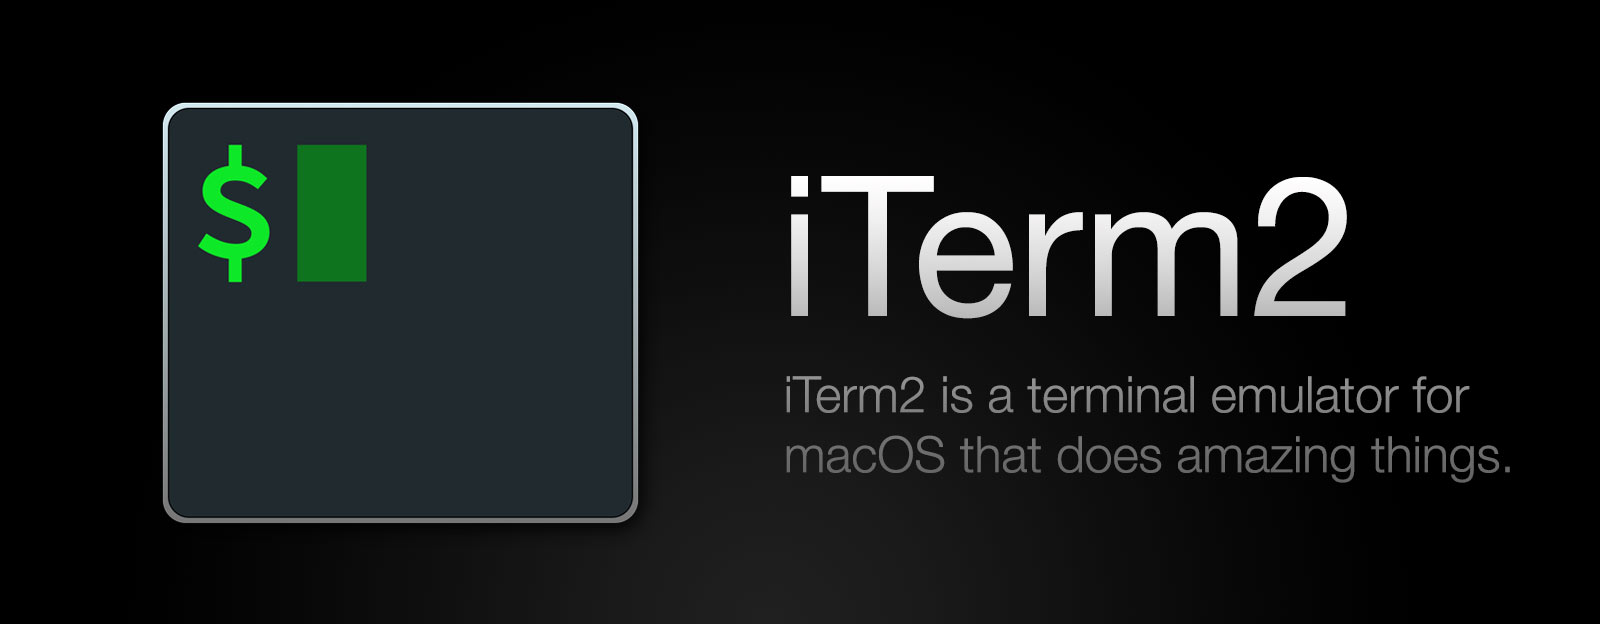 Iterm2 For Mac Os X 10.7.5